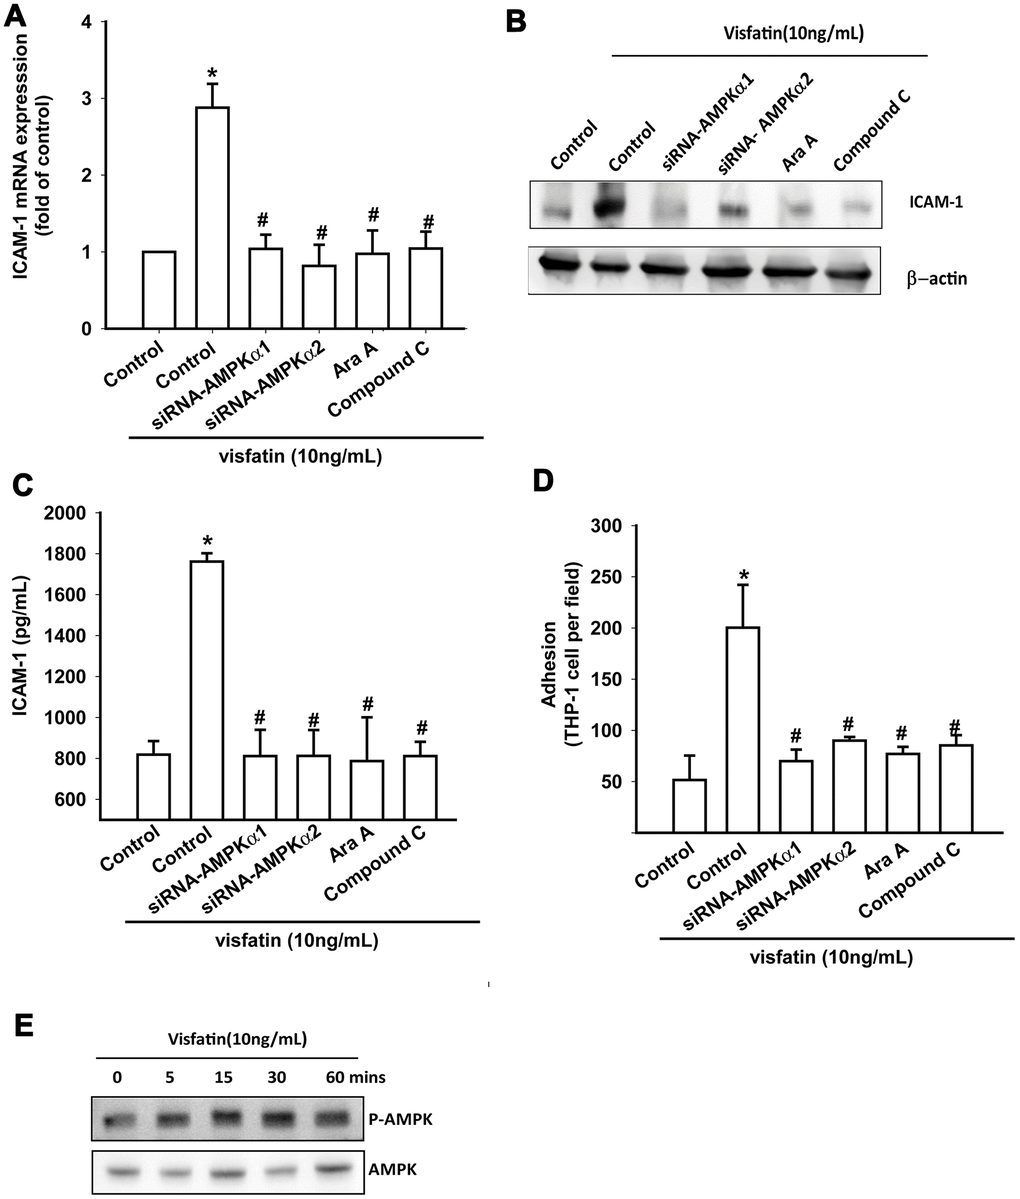 The AMPK pathway is involved in visfatin-induced ICAM-1 synthesis and monocyte adhesion. (A–C) OASFs were pretreated with AMPK inhibitors (Ara A, compound C) or transfected with AMPK siRNAs, then incubated with visfatin for 24 h. ICAM-1 levels were examined by RT-qPCR, Western blot and ELISA assays. (D) OASFs were treated with the same conditions as those described in (A). THP-1 cells loaded with BCECF-AM were added to OASFs for 6 h, then THP-1 cell adherence was measured by fluorescence microscopy. (E) OASFs were incubated with visfatin for the indicated time intervals, and AMPK phosphorylation was examined by Western blot. * p#p